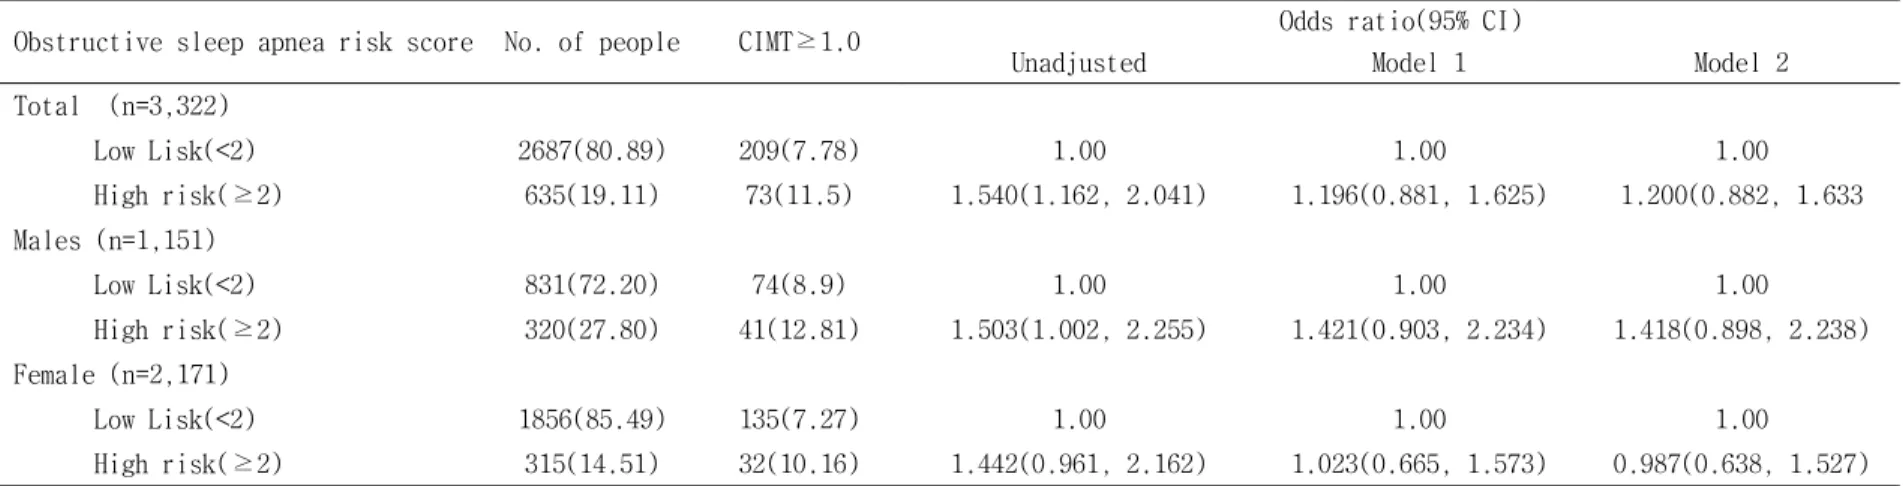 Table 4. Association between obstructive sleep apnea risk score and CIMT thickening